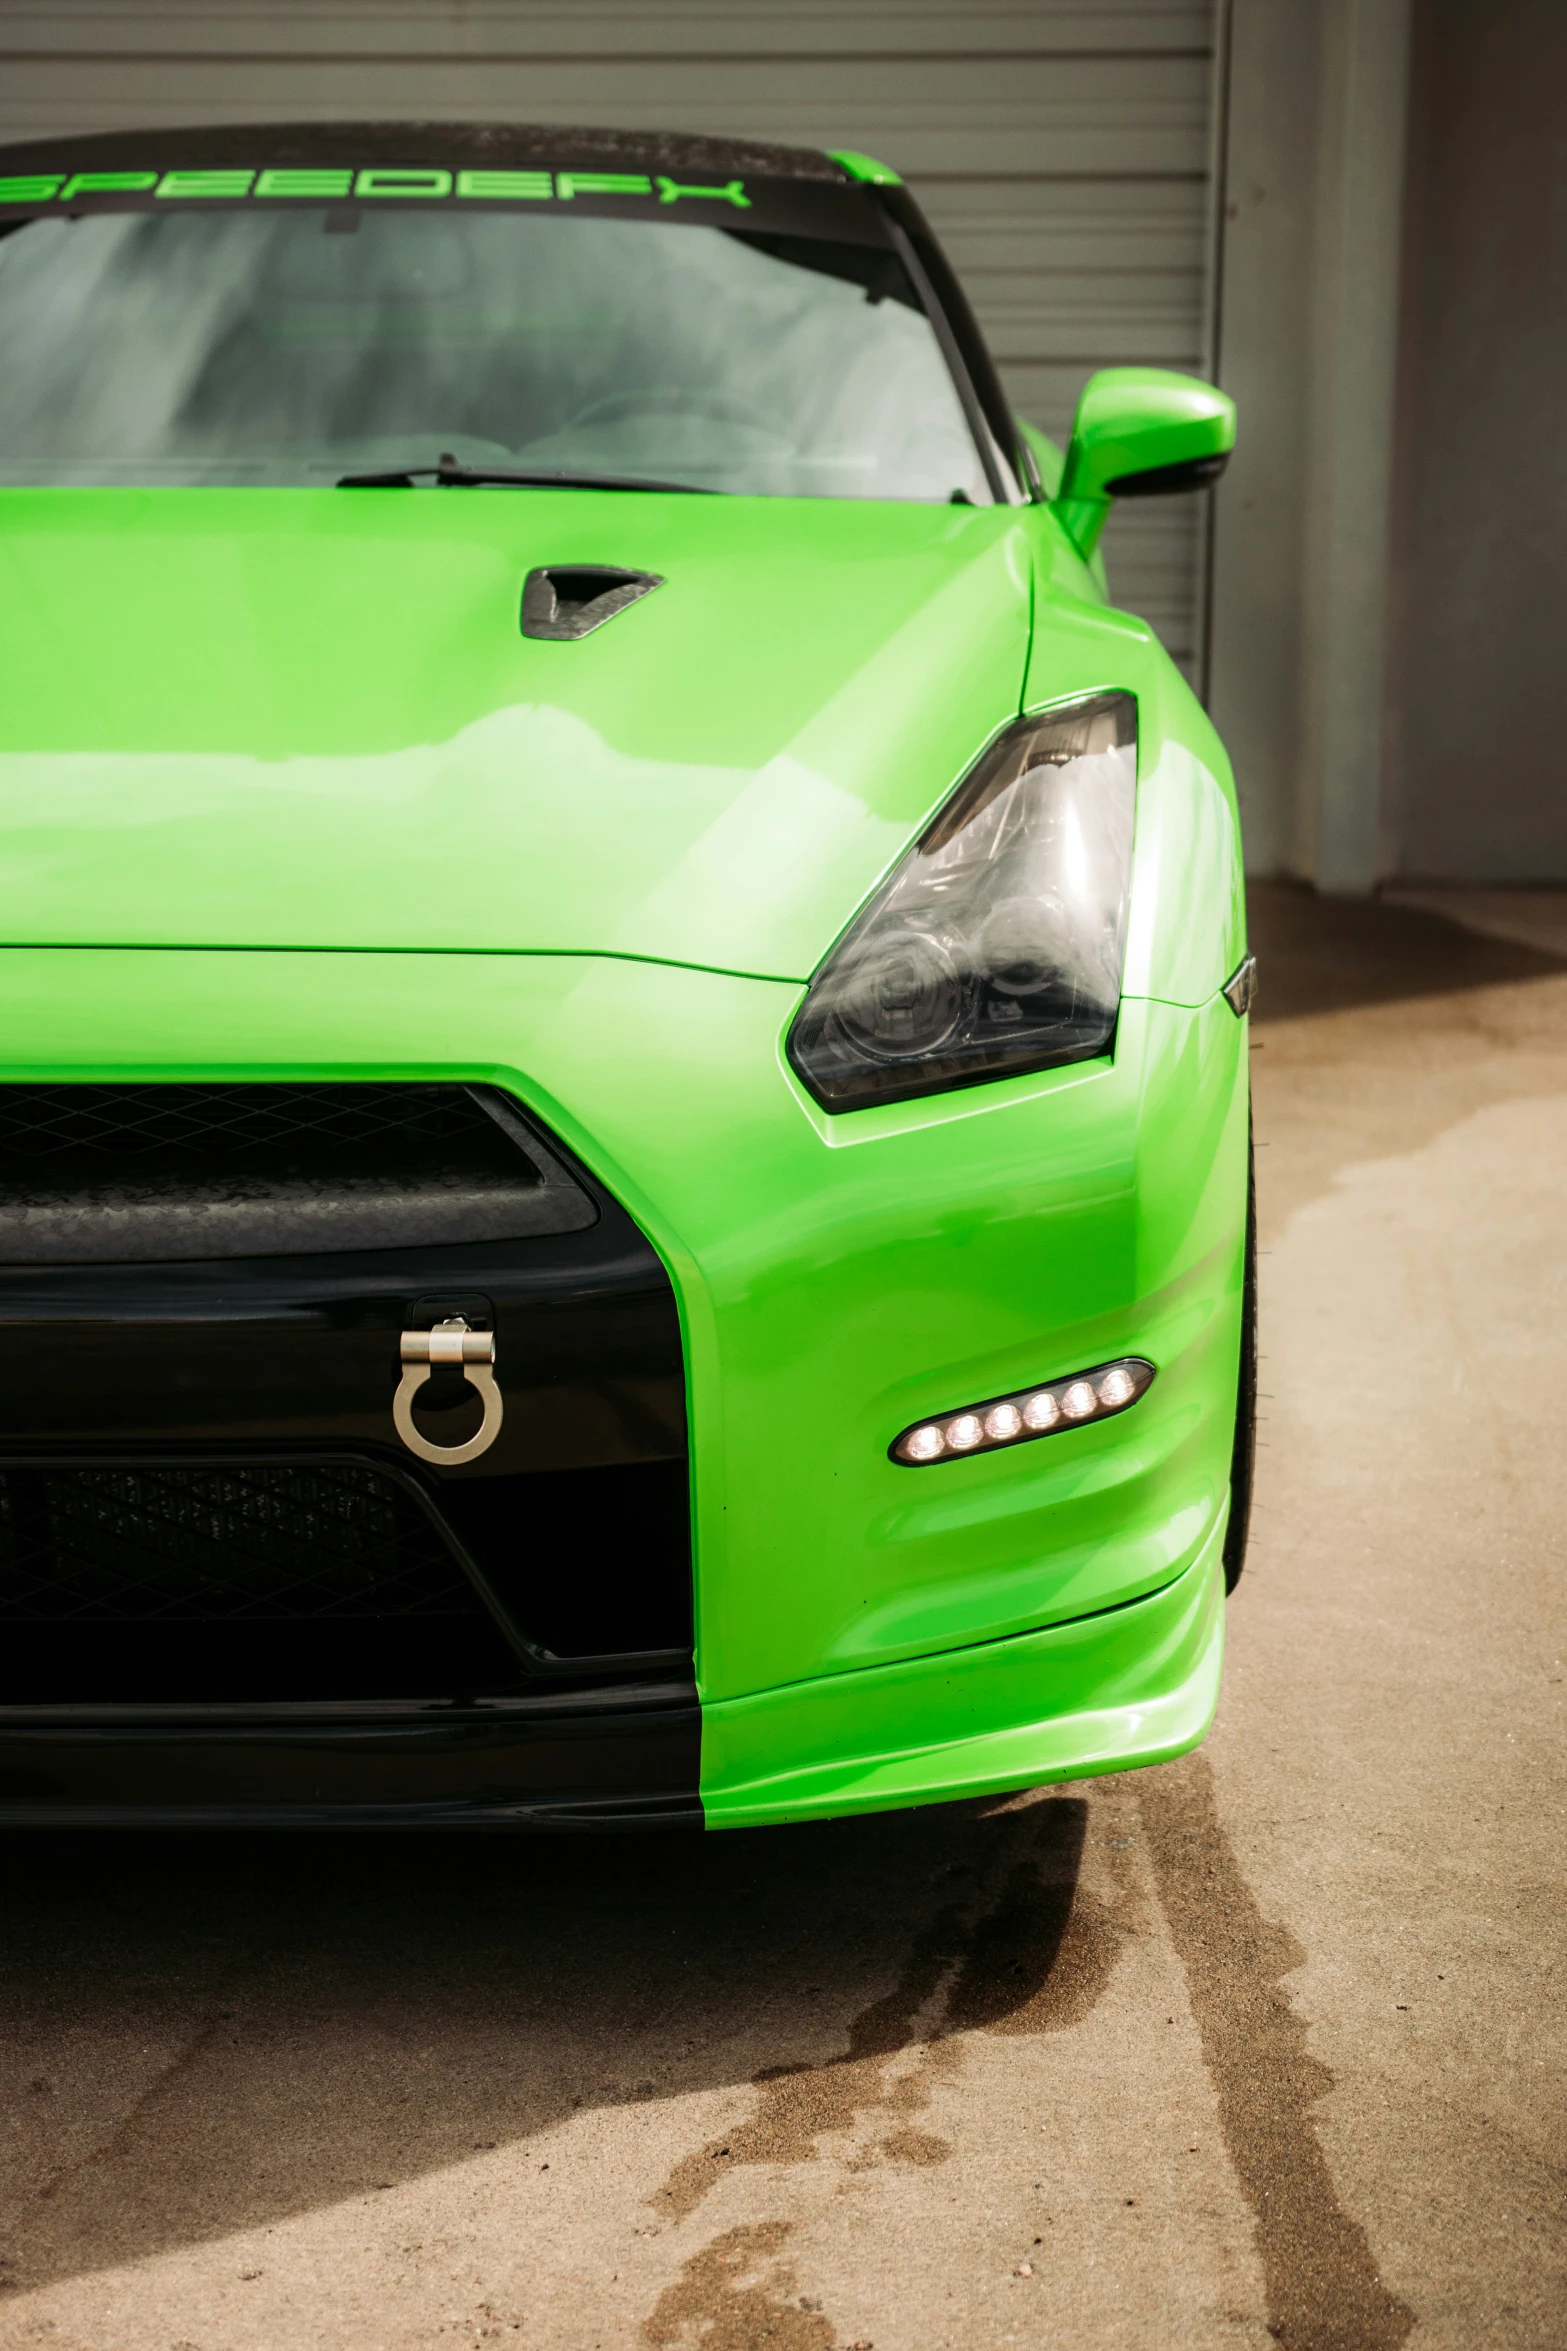 closeup of the front and headlamps of a lime green sports car